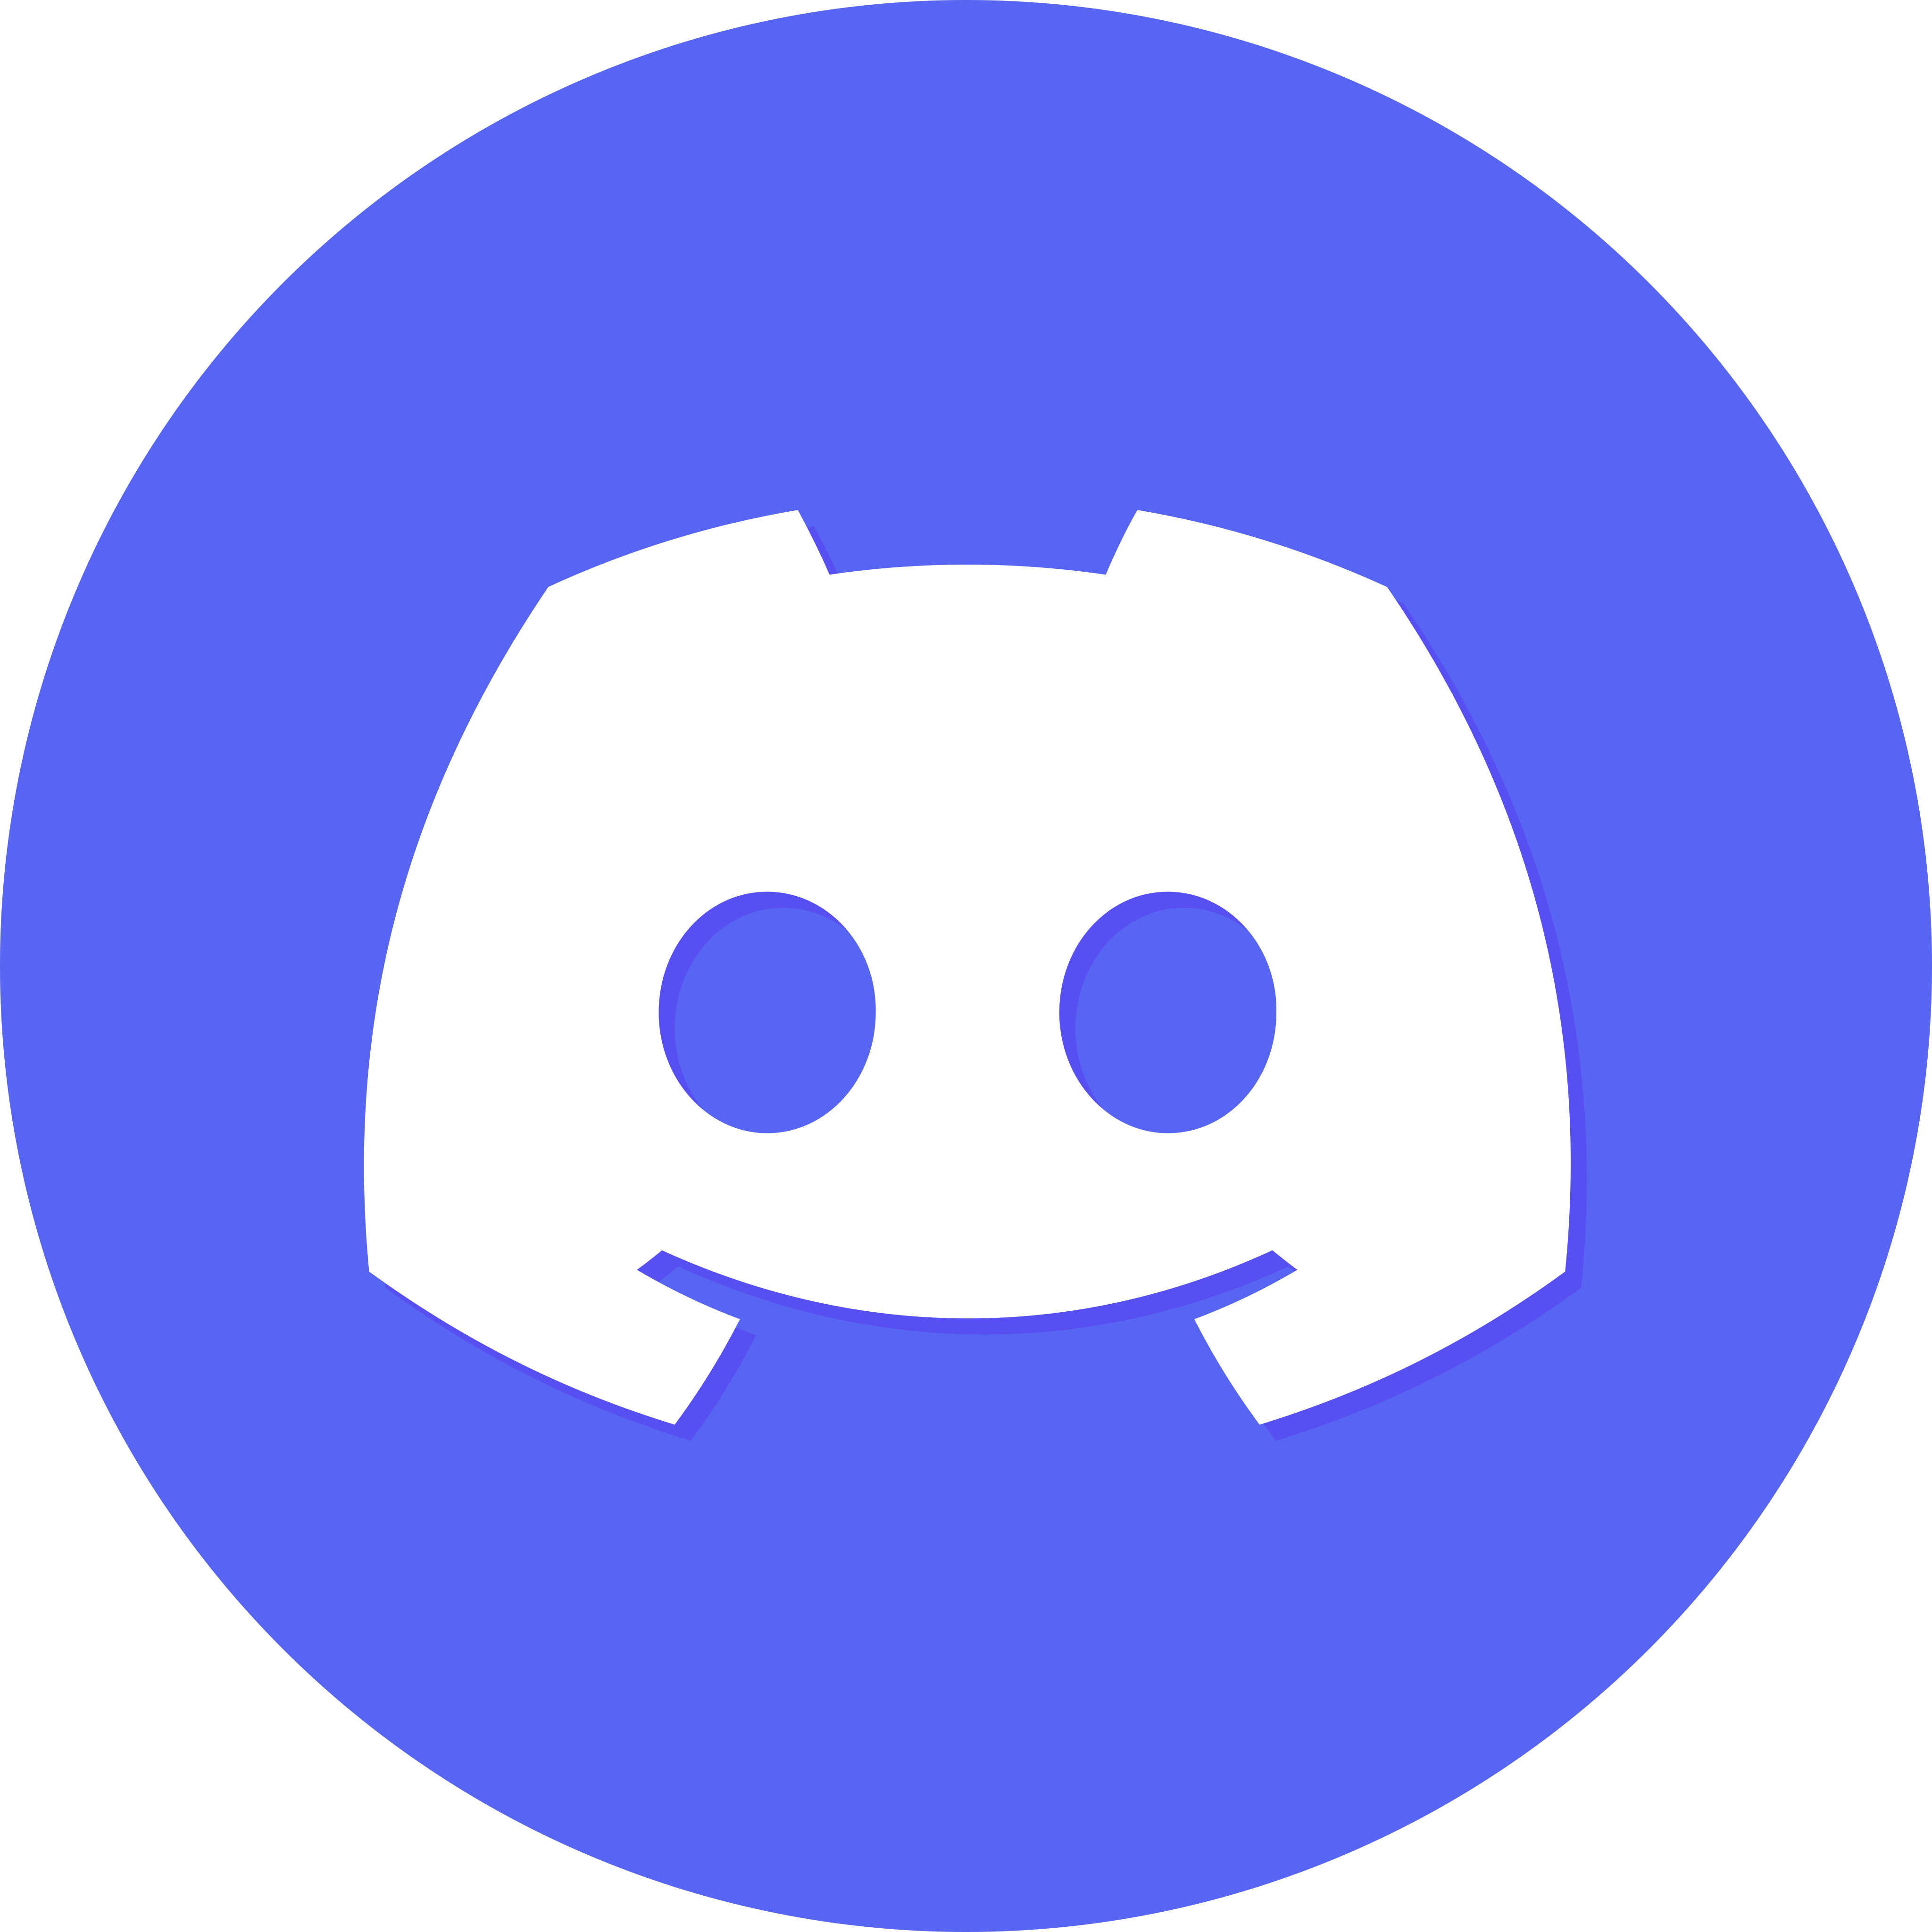 Join Discord